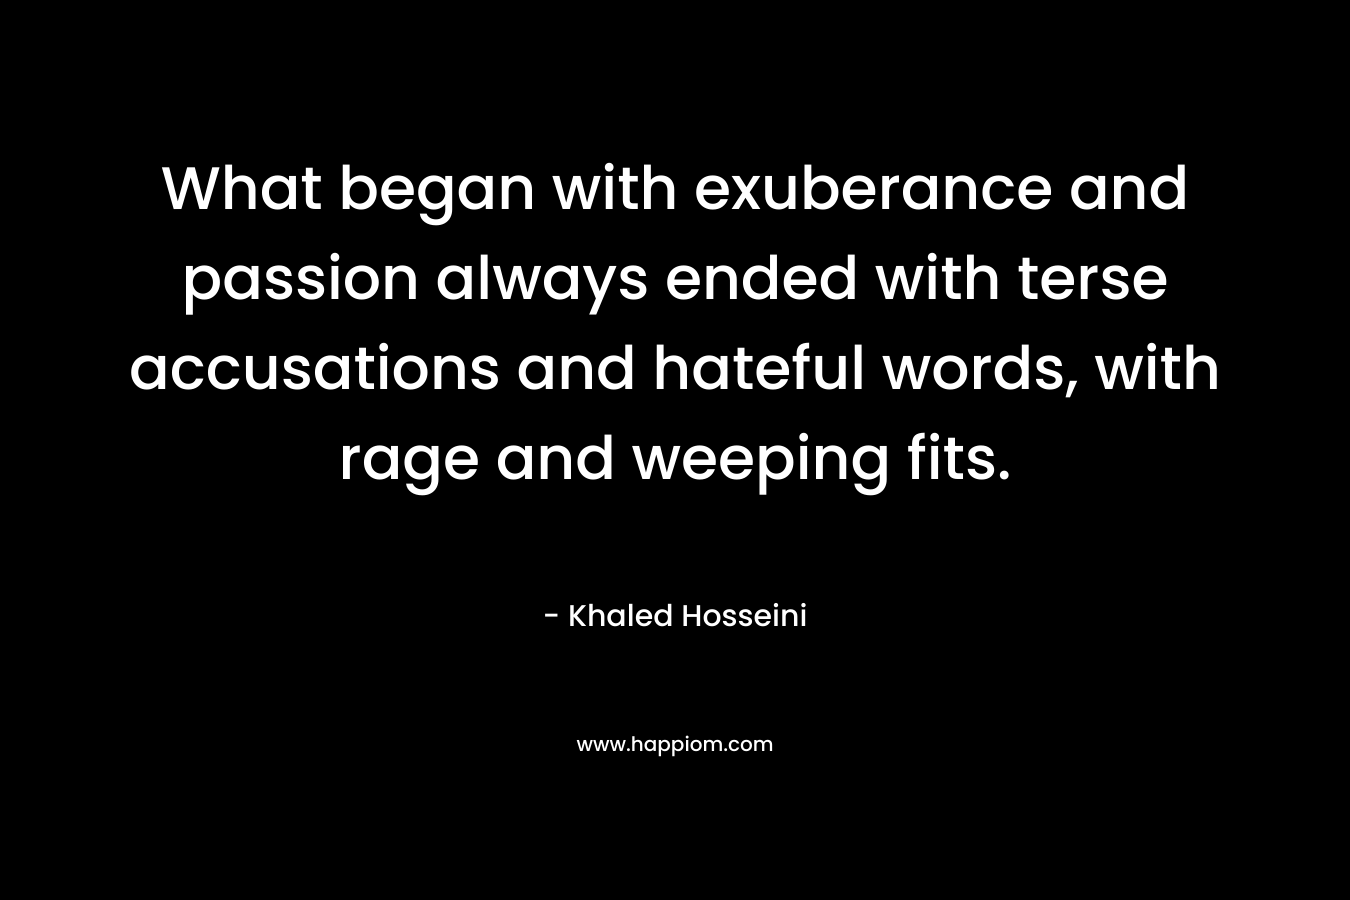 What began with exuberance and passion always ended with terse accusations and hateful words, with rage and weeping fits. – Khaled Hosseini